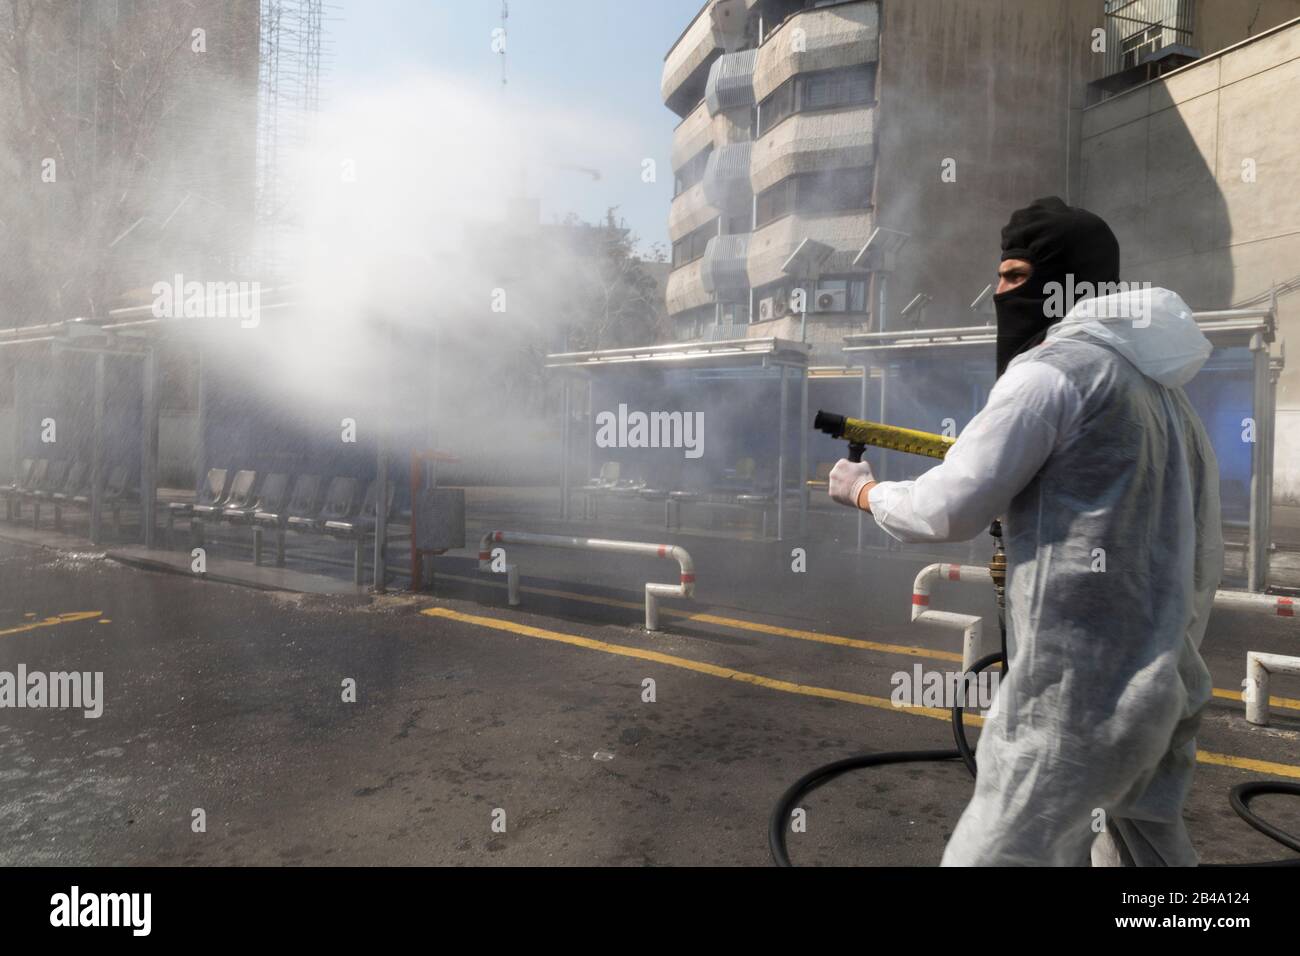 Tehran, Iran. 6th Mar, 2020. Firefighters and municipality workers with protective suits disinfect the streets, buses, and taxies as a precaution to the coronavirus (Covid-19) in Vanak square of northern Tehran, Iran. Iranian officials canceled Friday prayer for the second week due to concerns over the spread of coronavirus and COVID-19. According to the last report by the Ministry of Health, there are 4,747 COVID-19 cases in Iran. 147 people have died so far. A Health Ministry spokesman warned authorities could use unspecified 'force' to halt travel between major cities. (Credit Image: © Ro Stock Photo